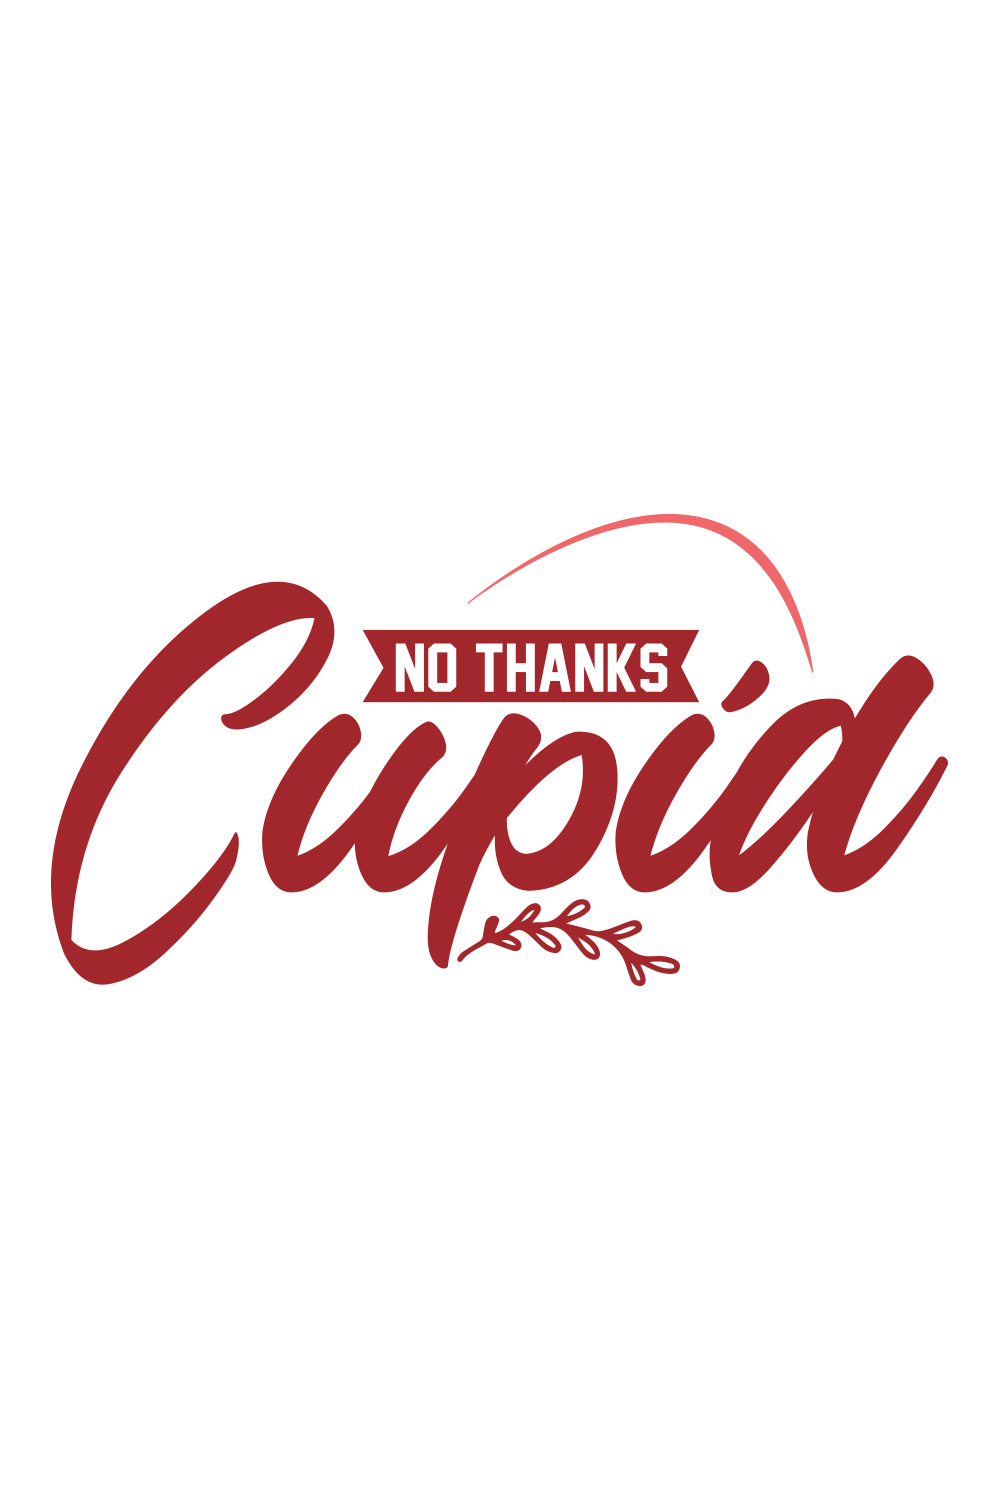 Image with great printable lettering No Thanks Cupid